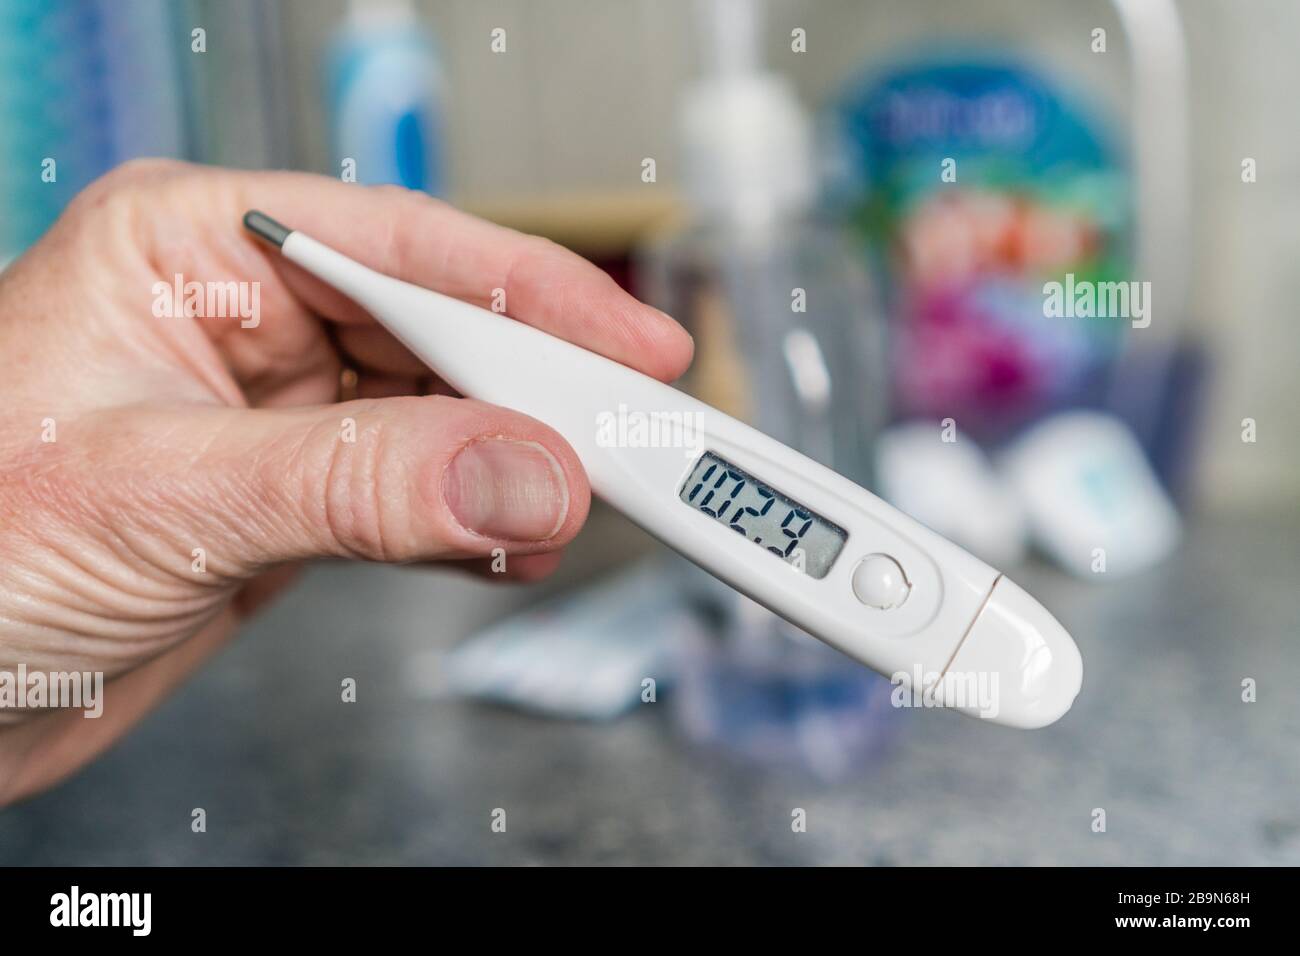 https://c8.alamy.com/comp/2B9N68H/close-up-of-hand-holding-thermometer-measuring-a-high-fever-2B9N68H.jpg